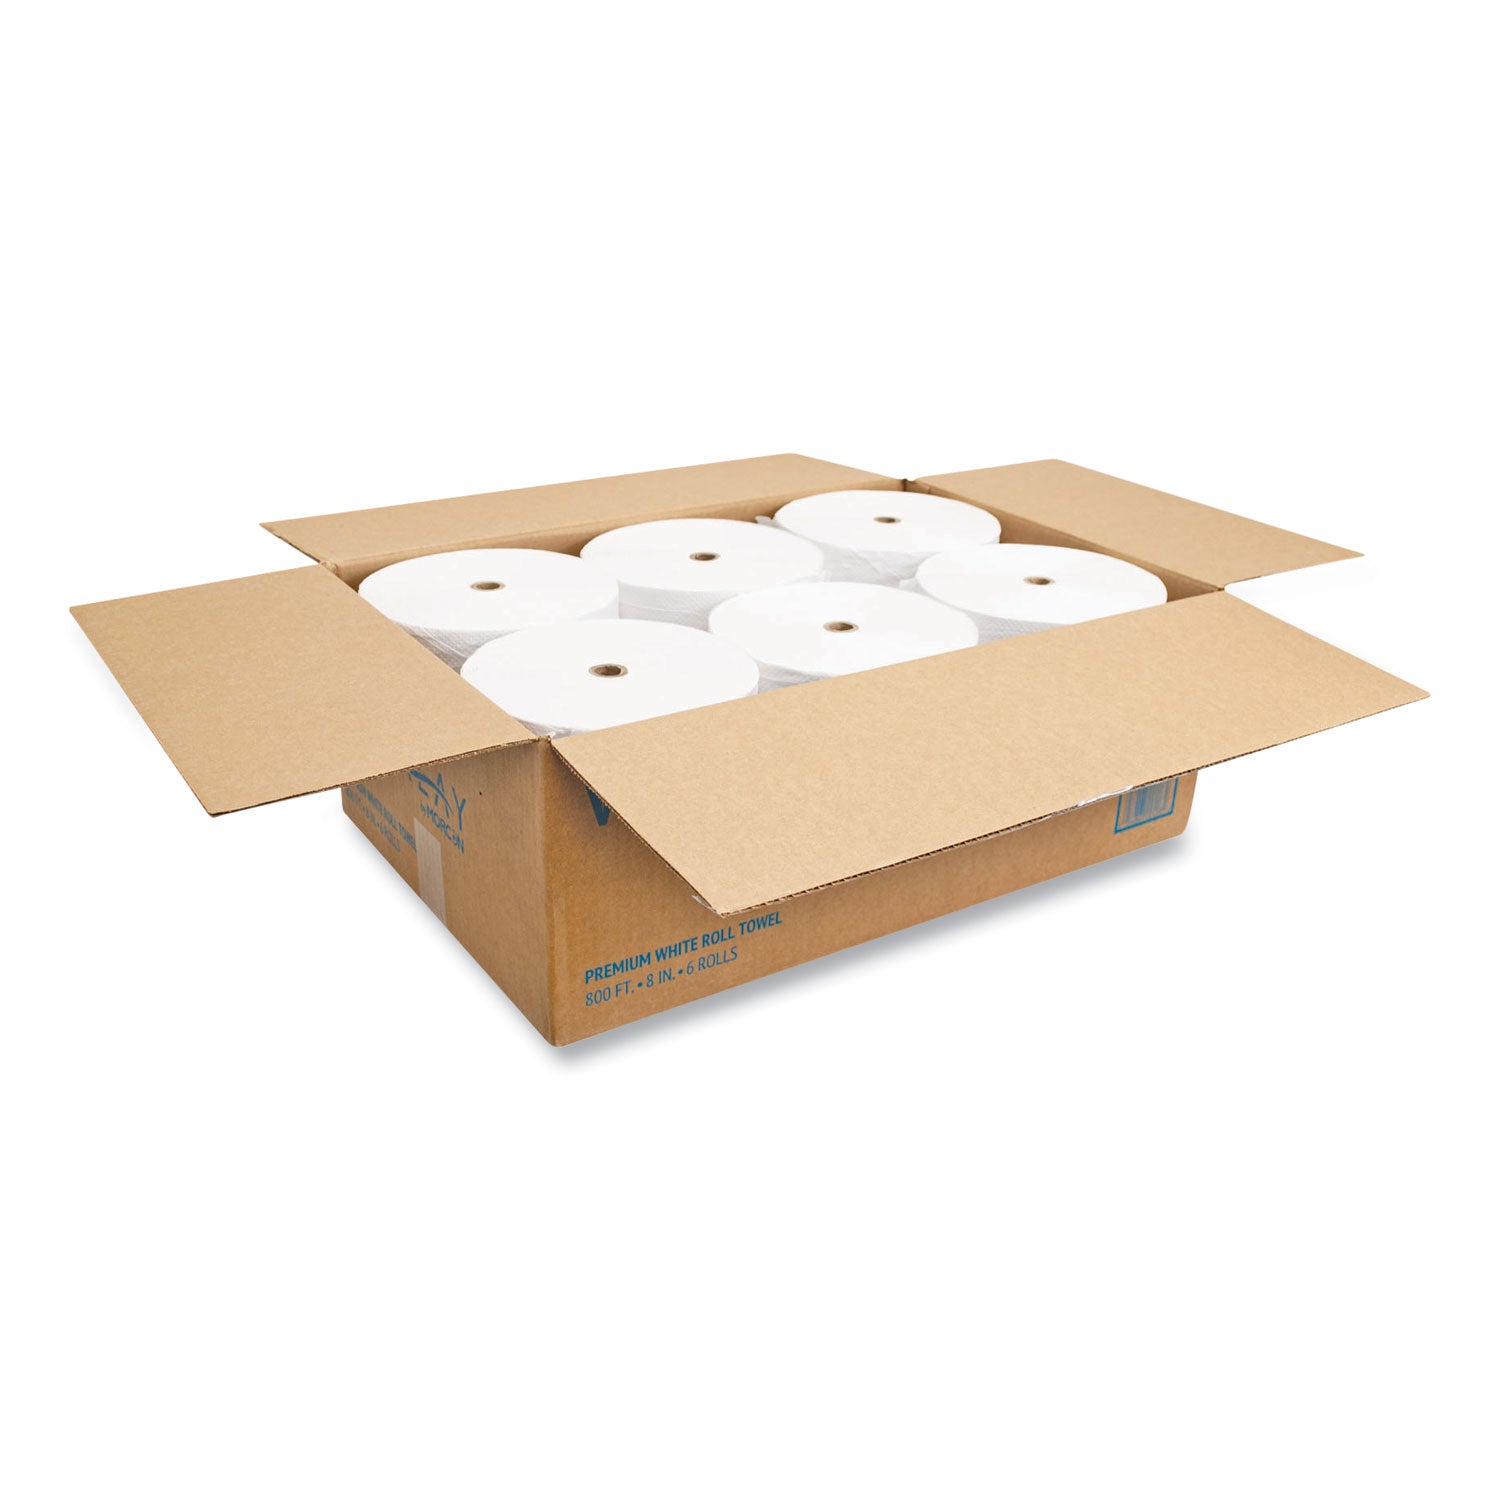 valay-proprietary-roll-towels-1-ply-8-x-800-ft-white-6-rolls-carton_morvw888 - 3